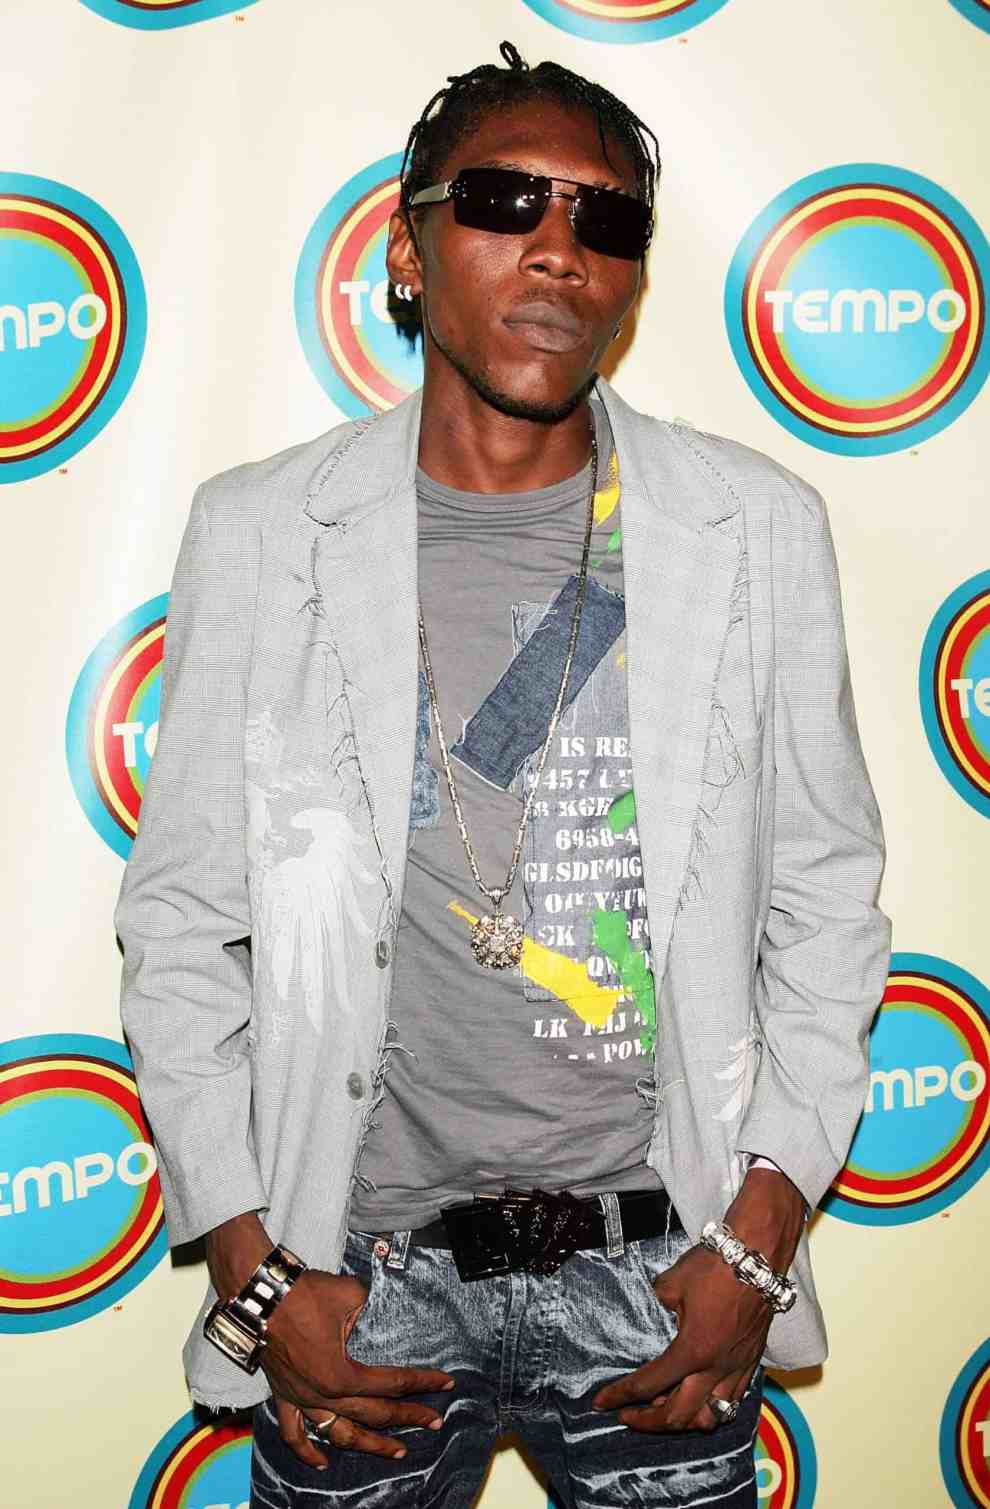 ST. MARY - OCTOBER 16: Vybz Kartel poses for a photo backstage during MTV's Tempo network launch celebration October 16, 2005 in St. Mary, Jamaica.